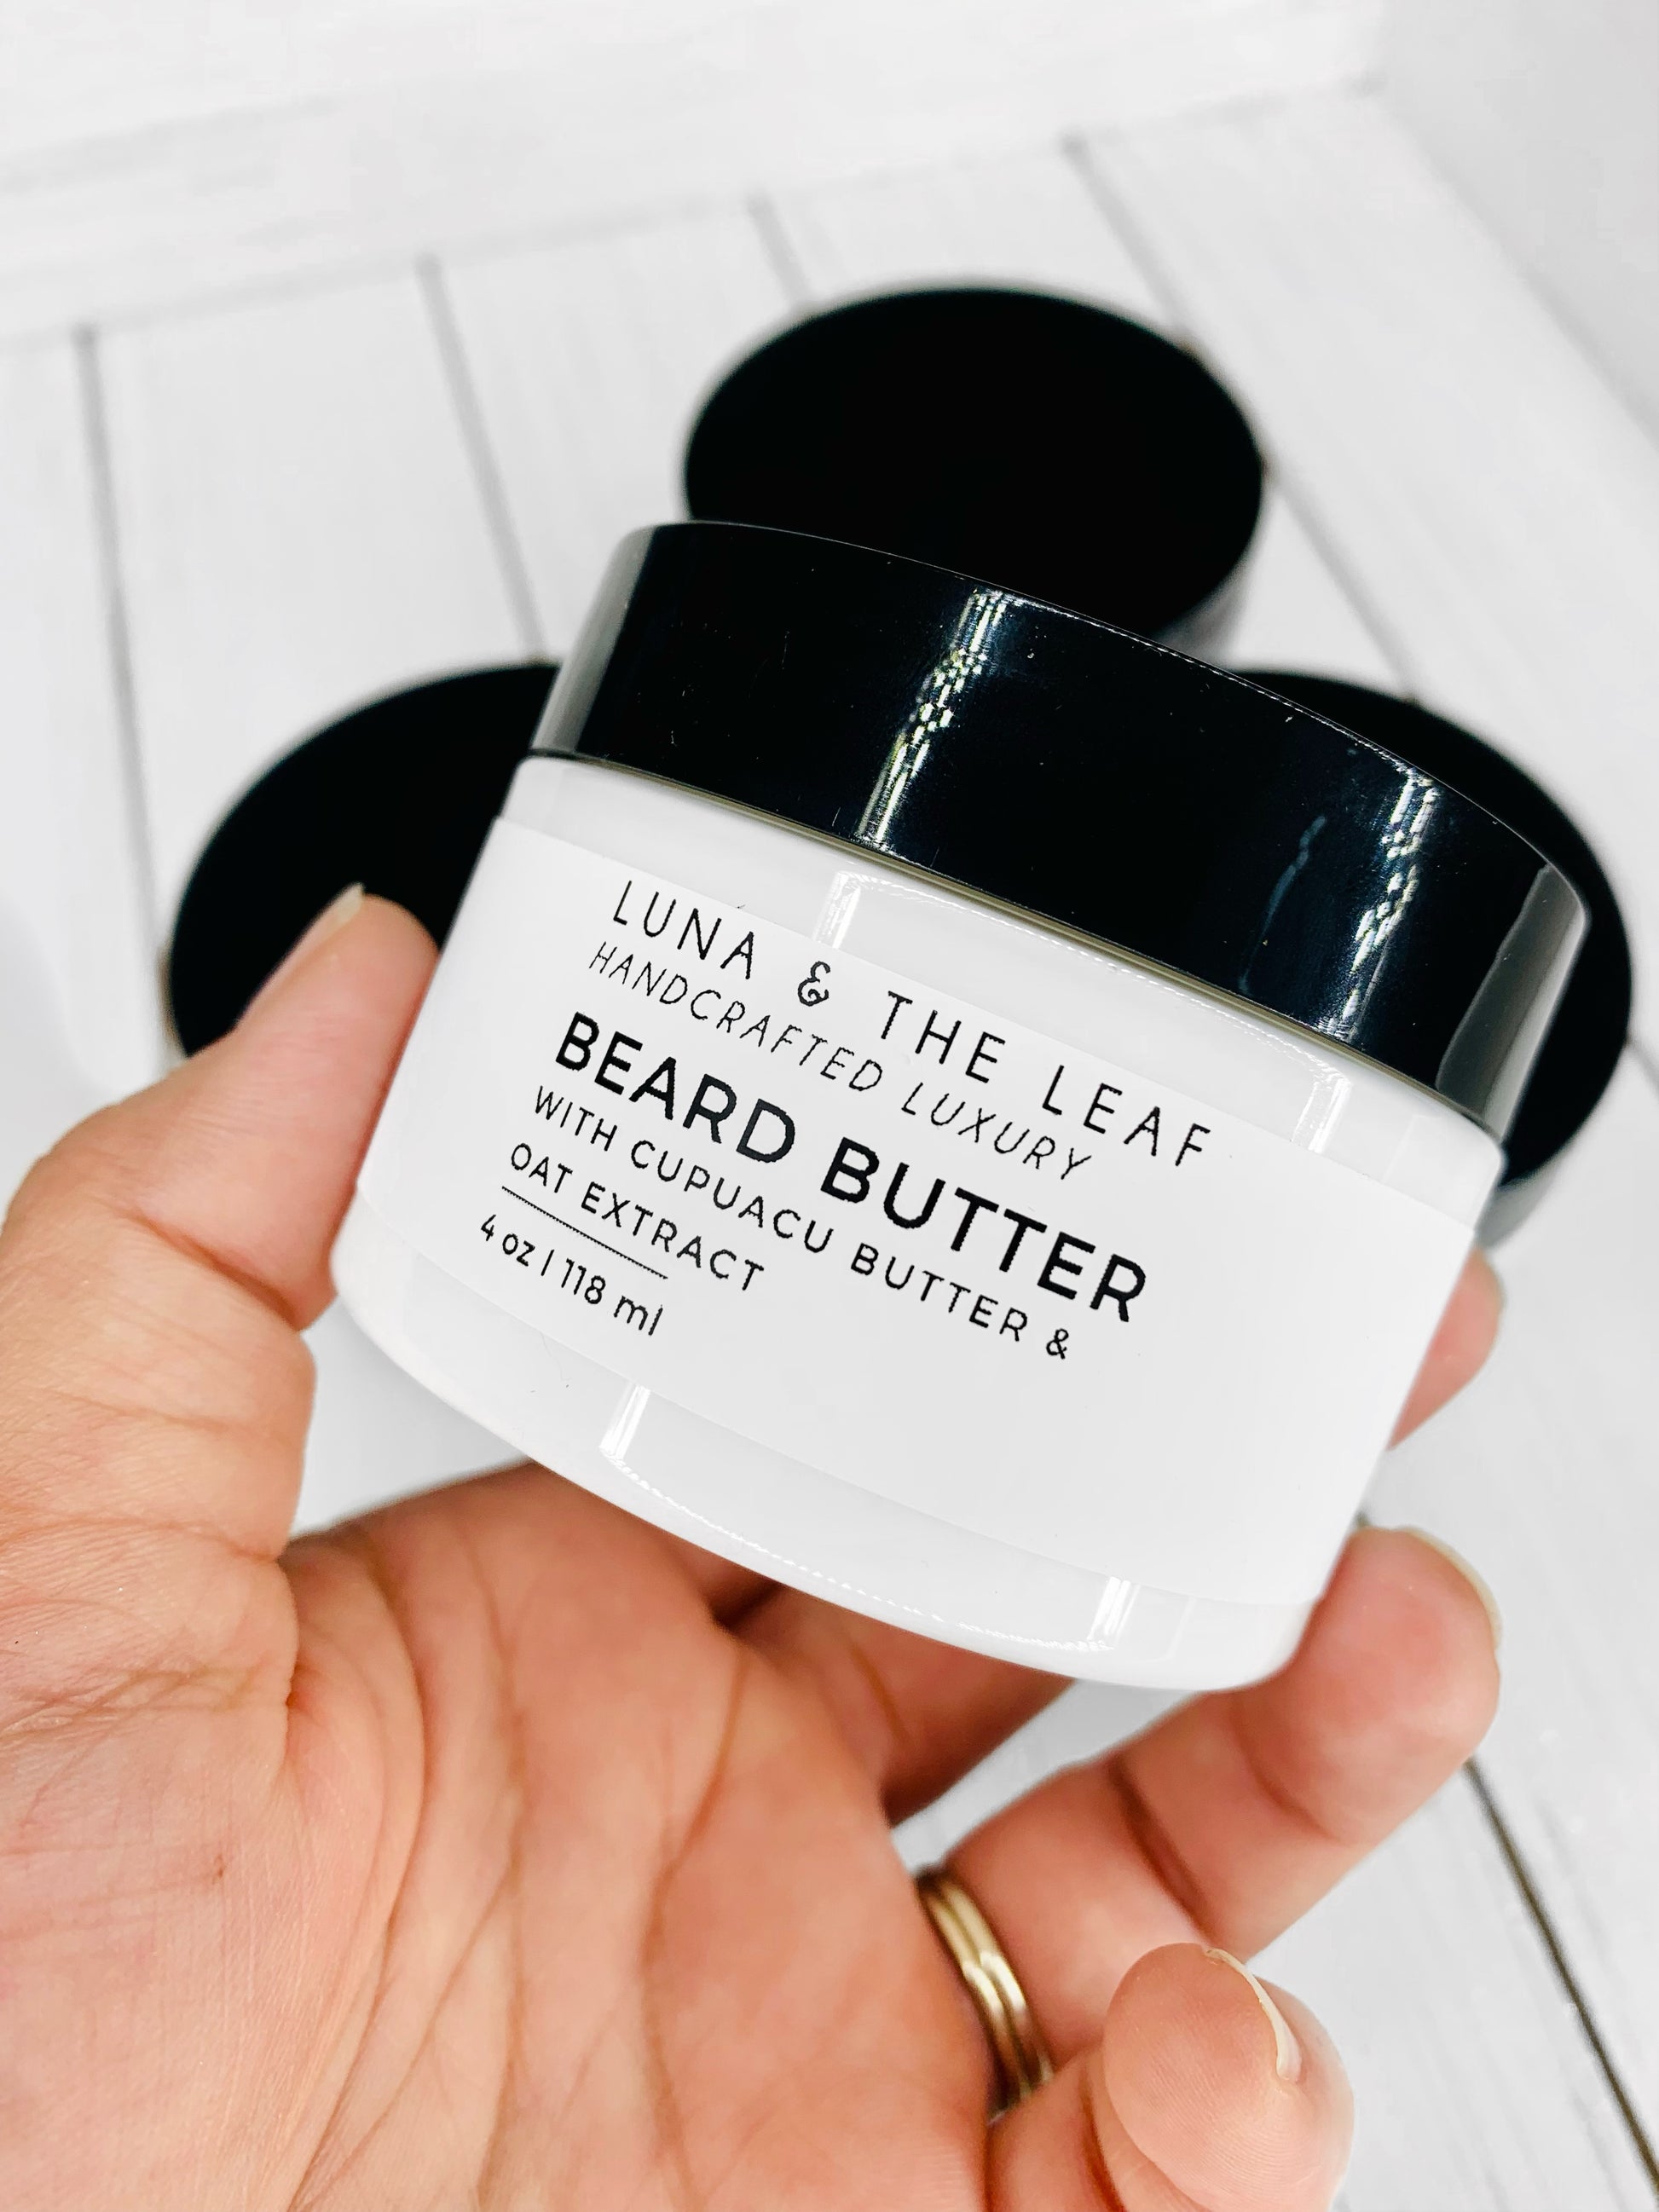 White cream in a container with a white label that reads Beard Butter. Container is being held in a hand. It is on a white wood background with three other containers in the background.